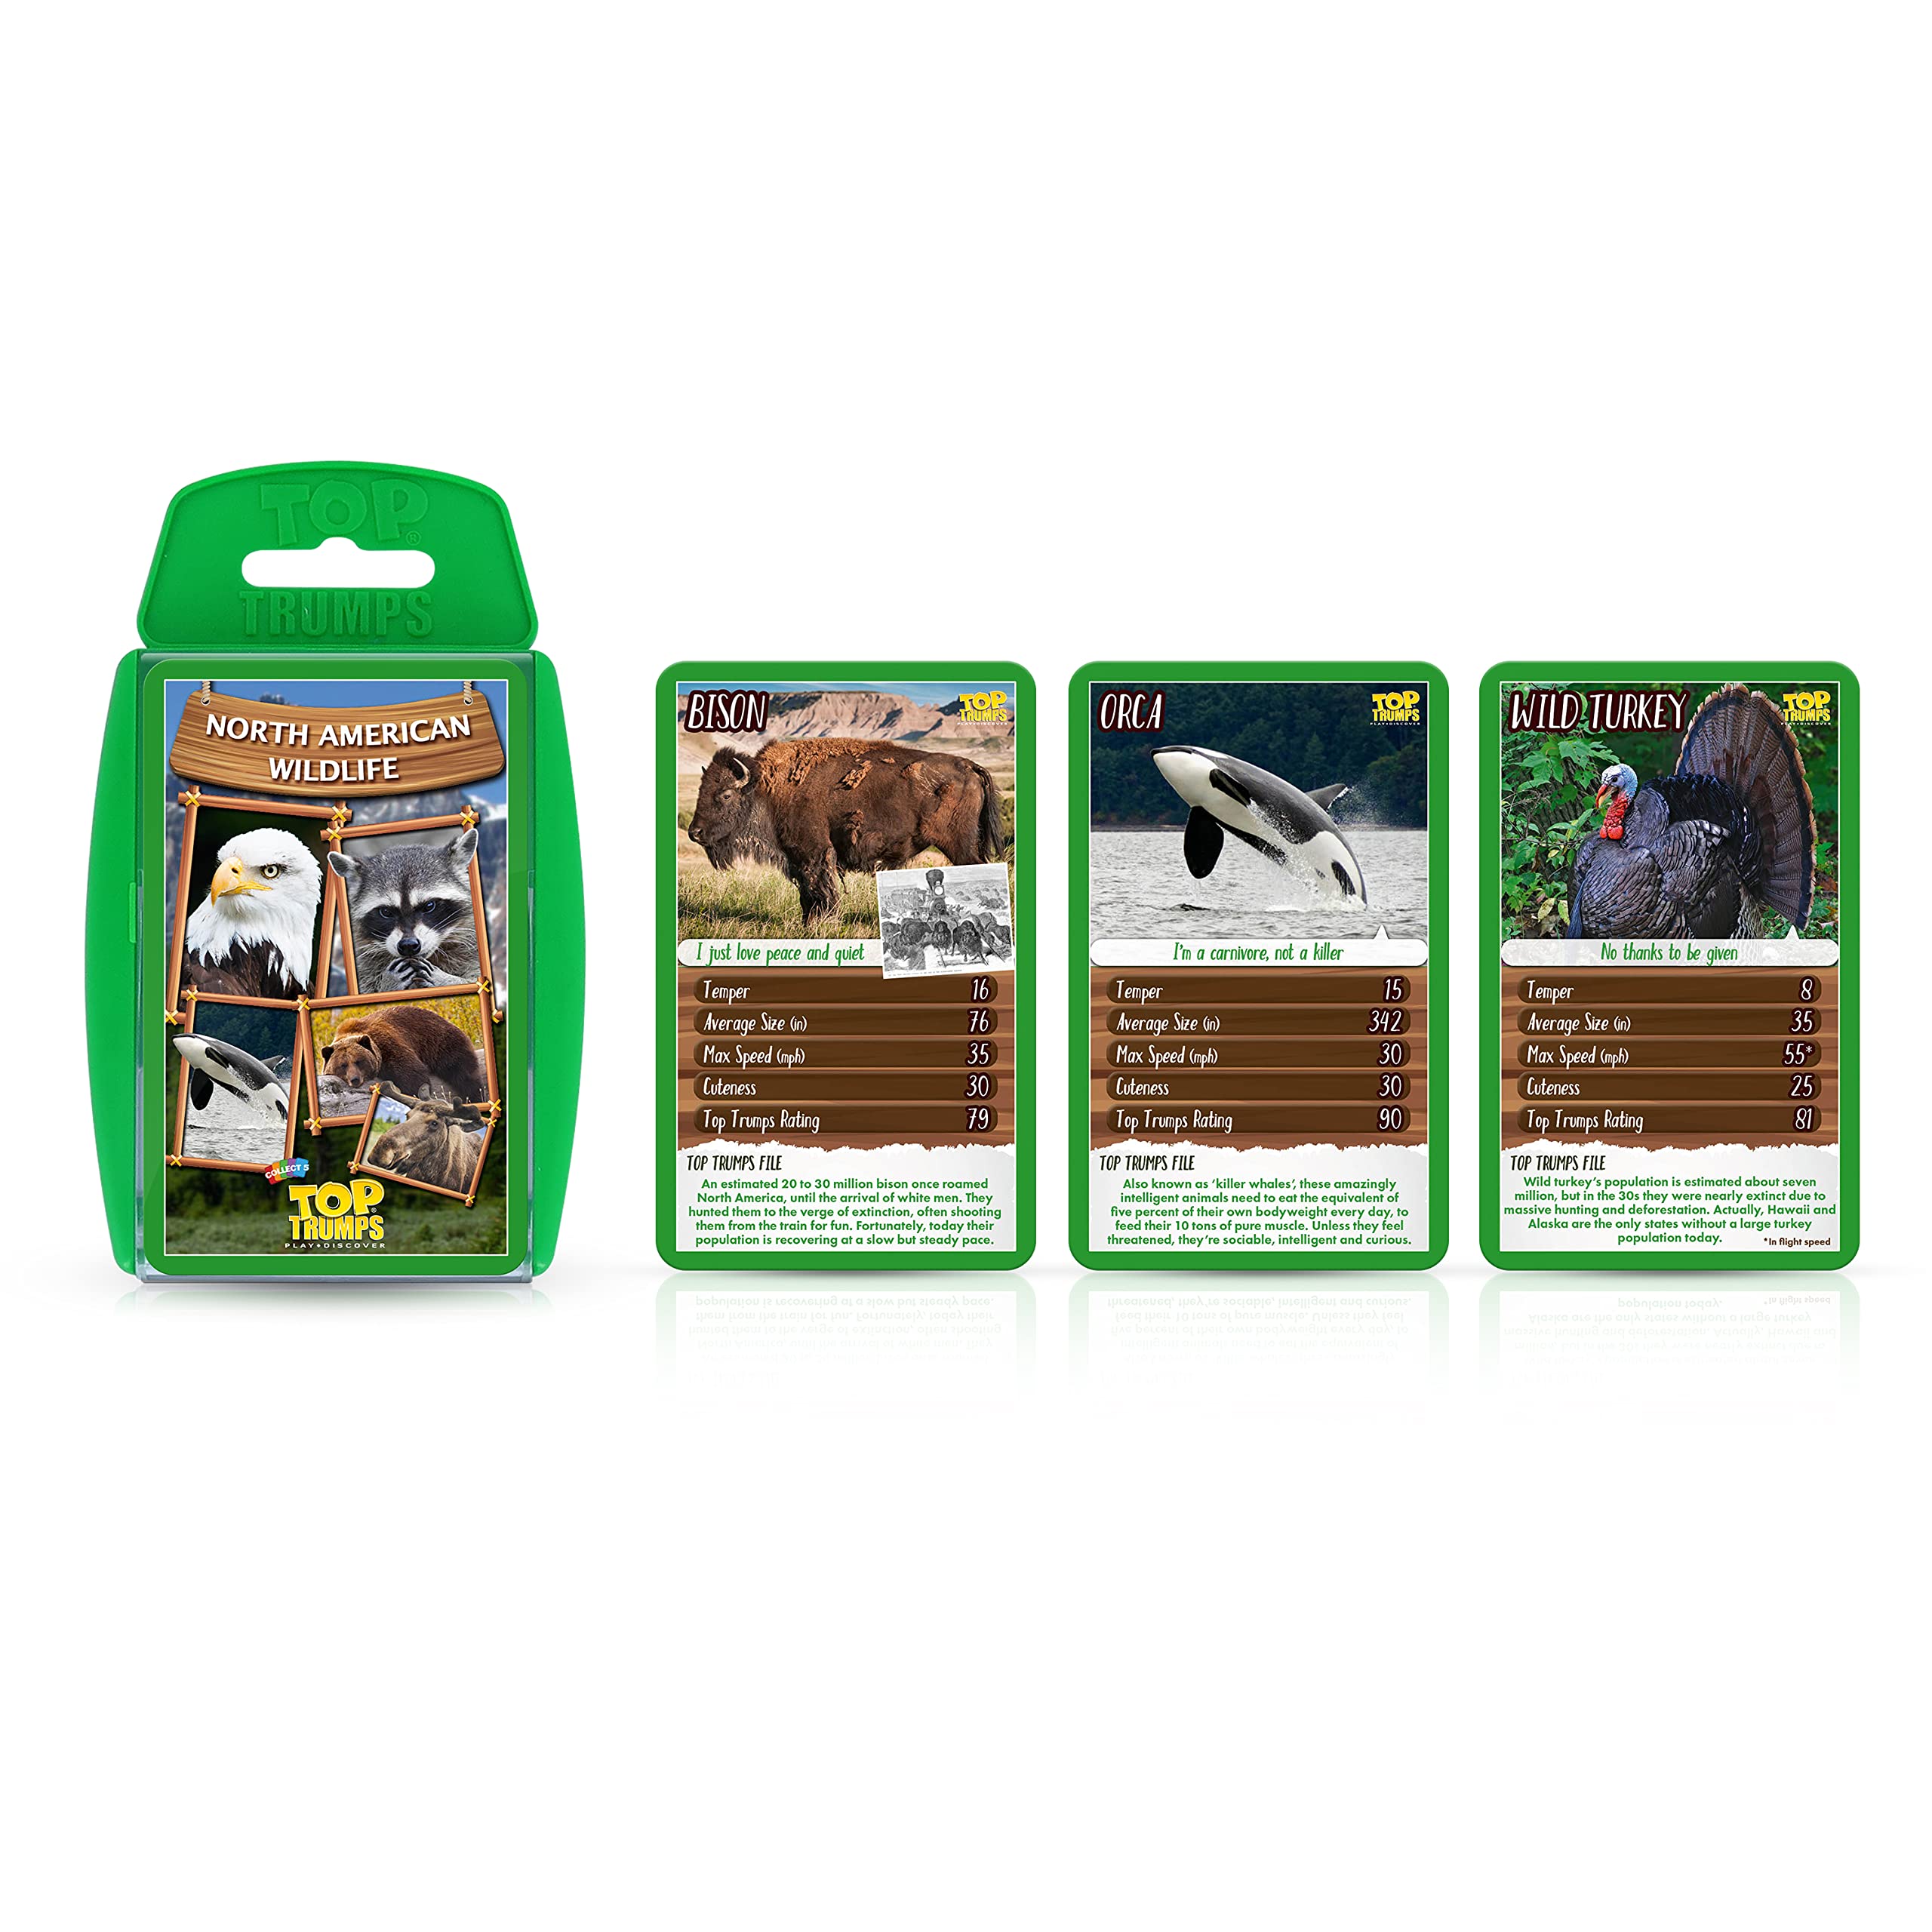 The Great Outdoors Top Trumps Card Game Bundle